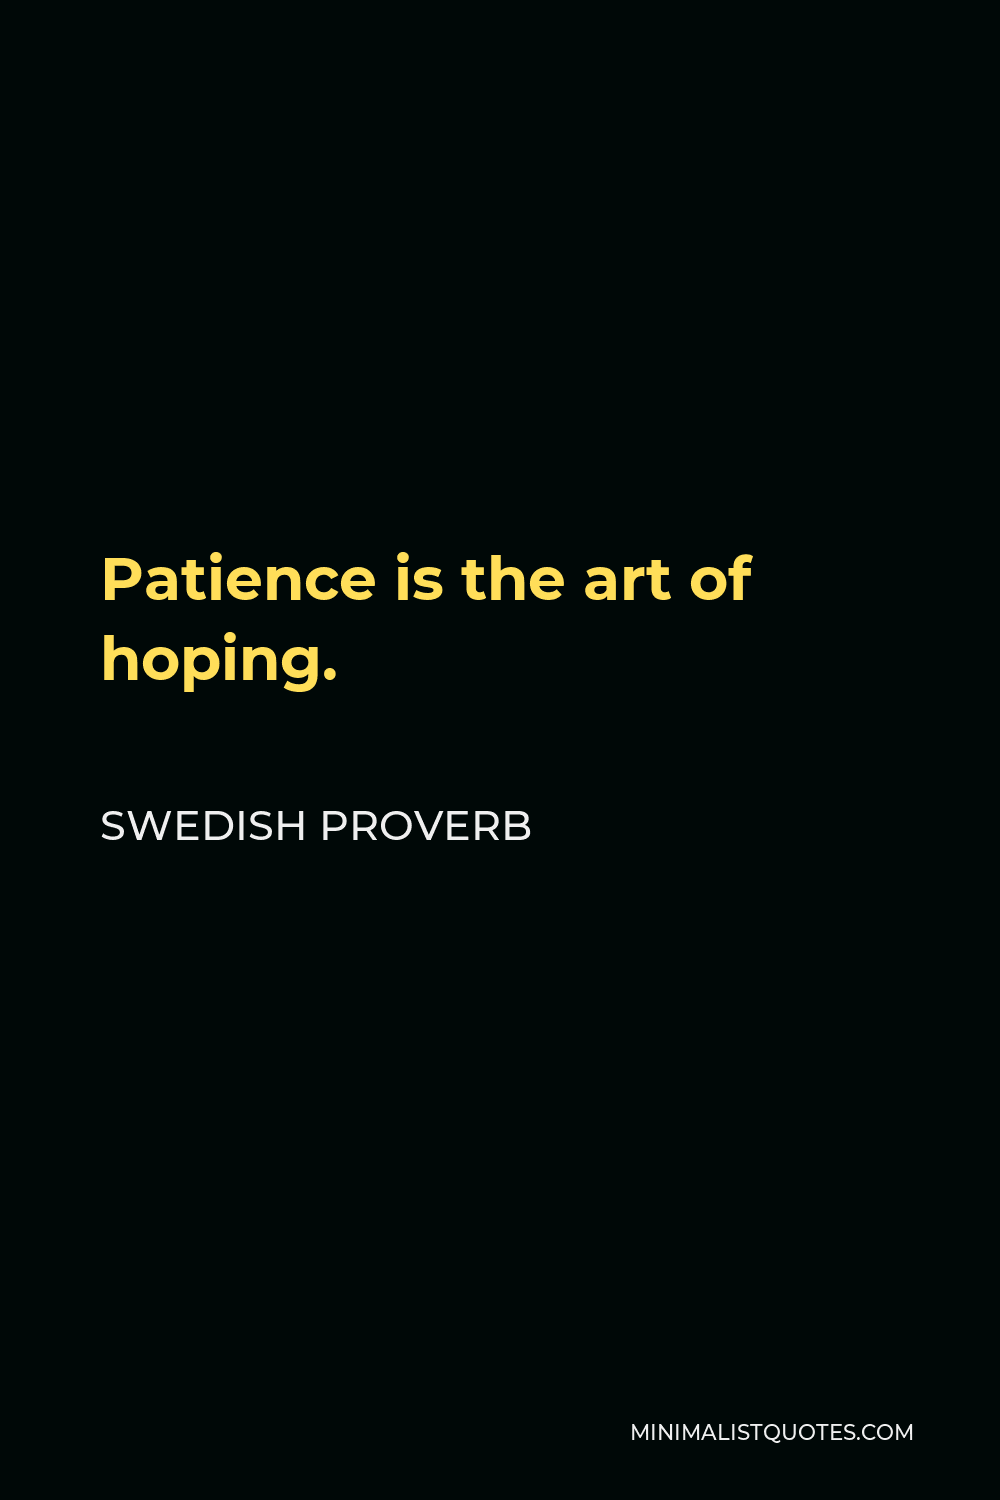 Swedish Proverb Quote - Patience is the art of hoping.